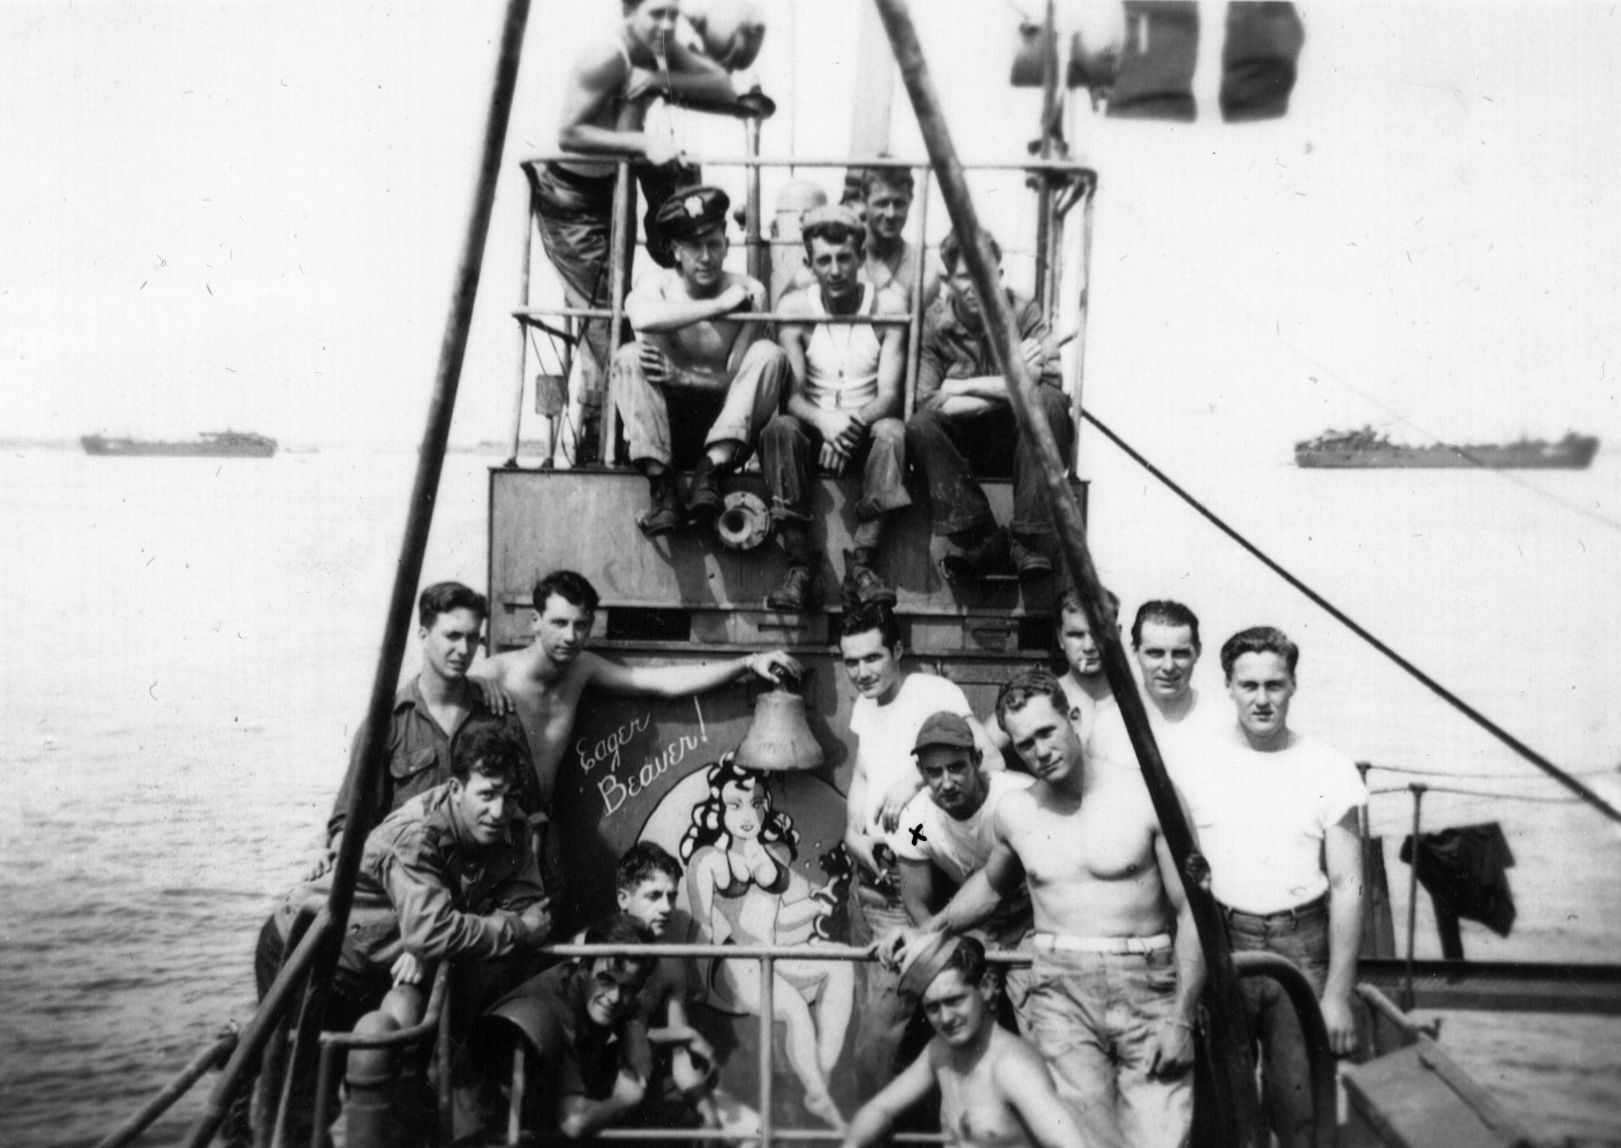 John Wayne Auld (in baseball cap) and fellow crewmen aboard an LCT in the English Channel. 